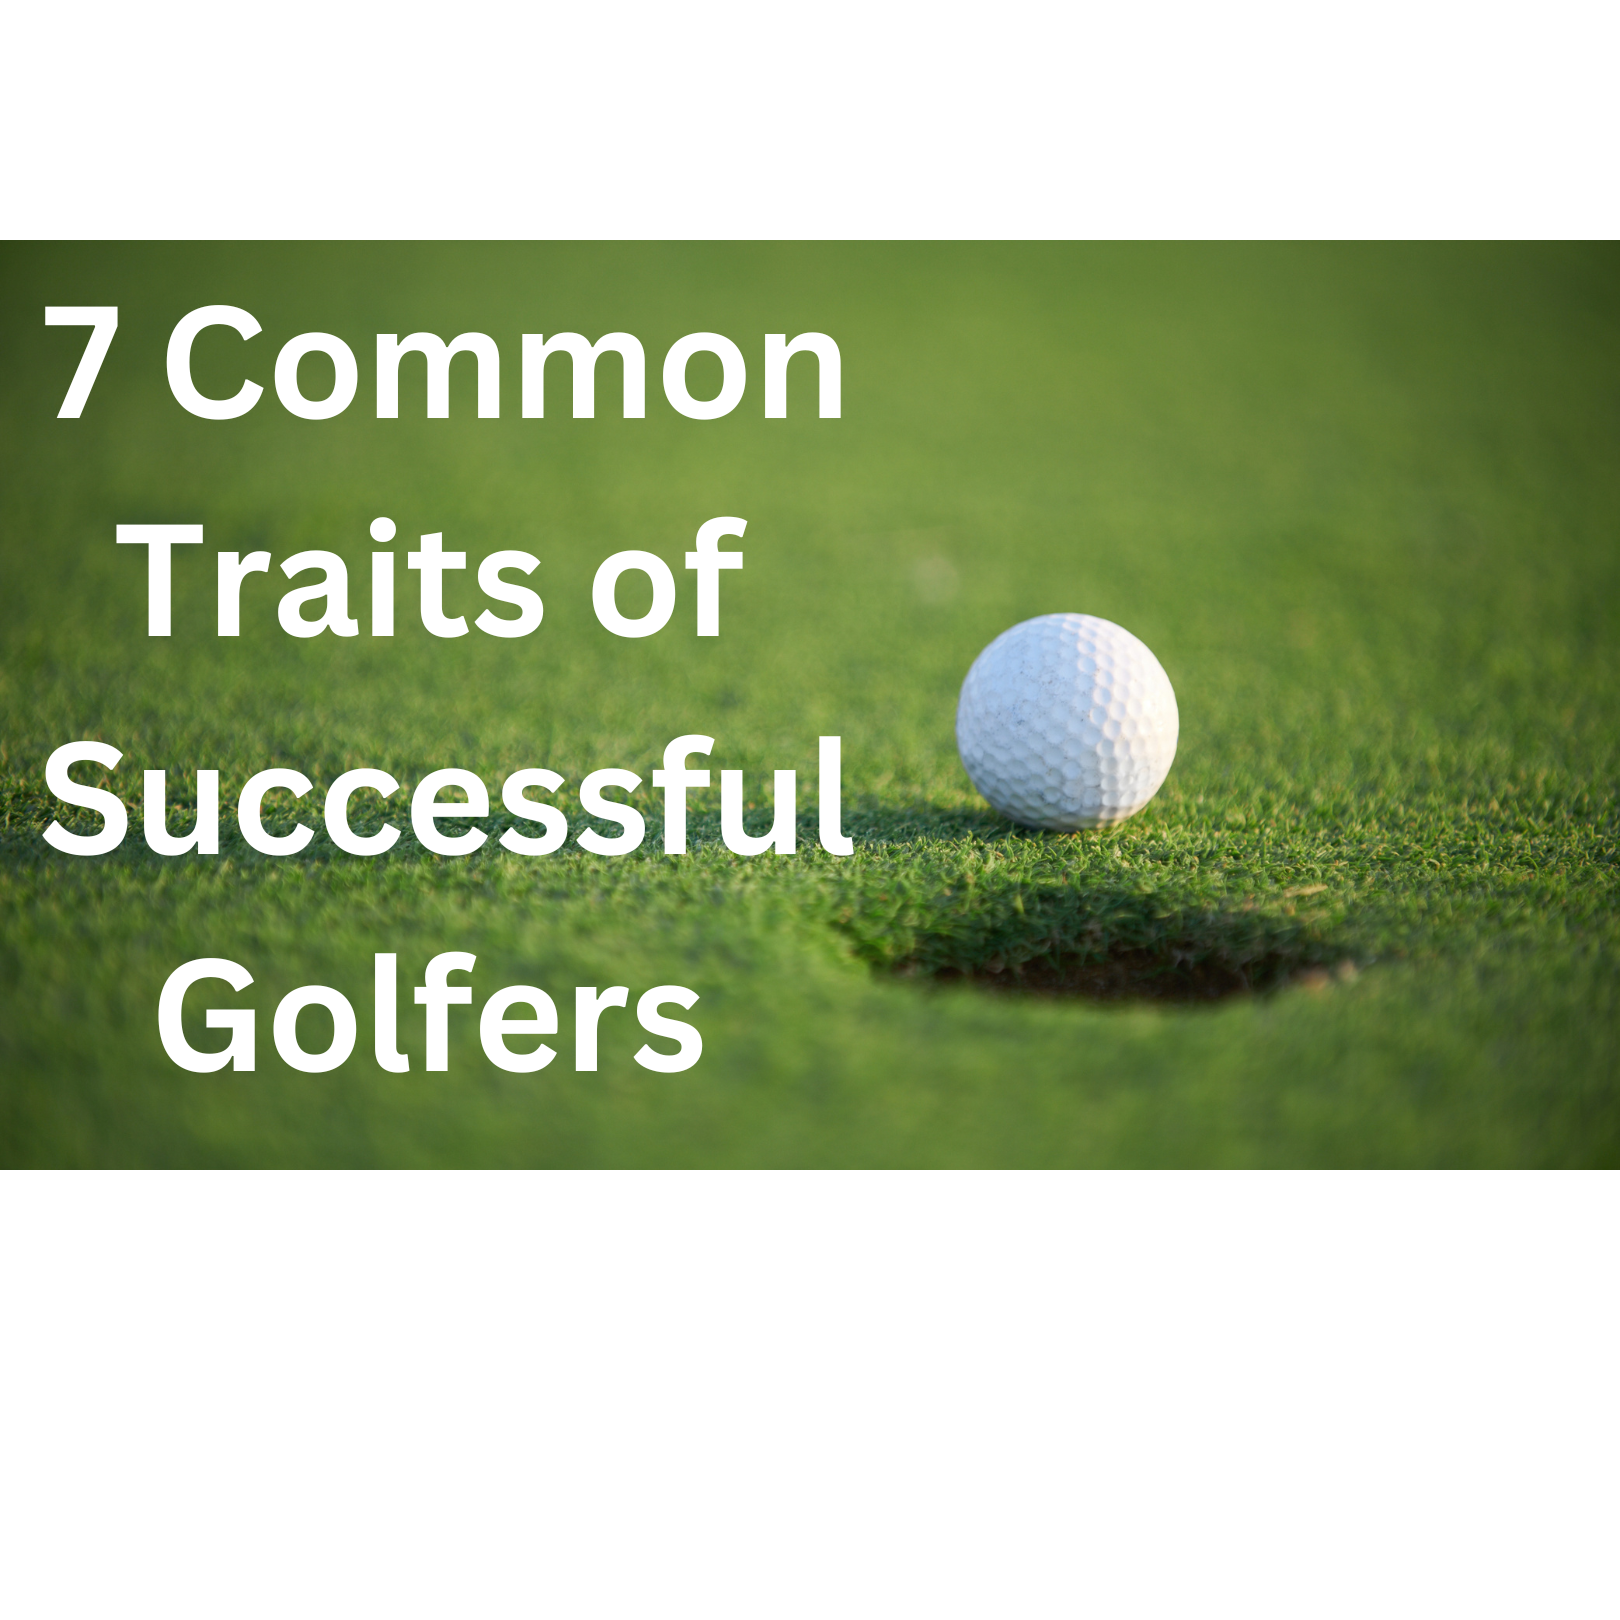 7 Common Traits of Successful Golfers, best golf lessons Orlando, Golf Academy Orlando, John Hughes Golf, Florida Golf Schools, Golf Schools in Florida, Orlando Golf Schools, Golf Schools in Orlando, Golf Lessons in Orlando, Beginner Golf Lessons, Beginner Golf Schools, Kissimmee Golf Lessons, Kissimmee Golf Schools, Orlando Junior Golf Lessons, Orlando Junior Golf Schools, Orlando Junior Golf Camps, Orlando Ladies Golf Lessons, Orlando Ladies Golf Schools, Florida Golf Lessons, Orlando Golf School Vacations, Video Golf Lessons, Online Golf Lessons, Remote Golf Lessons, Golf Video Tips, Golf Instruction Online, McLemore, Falcon’s Fire